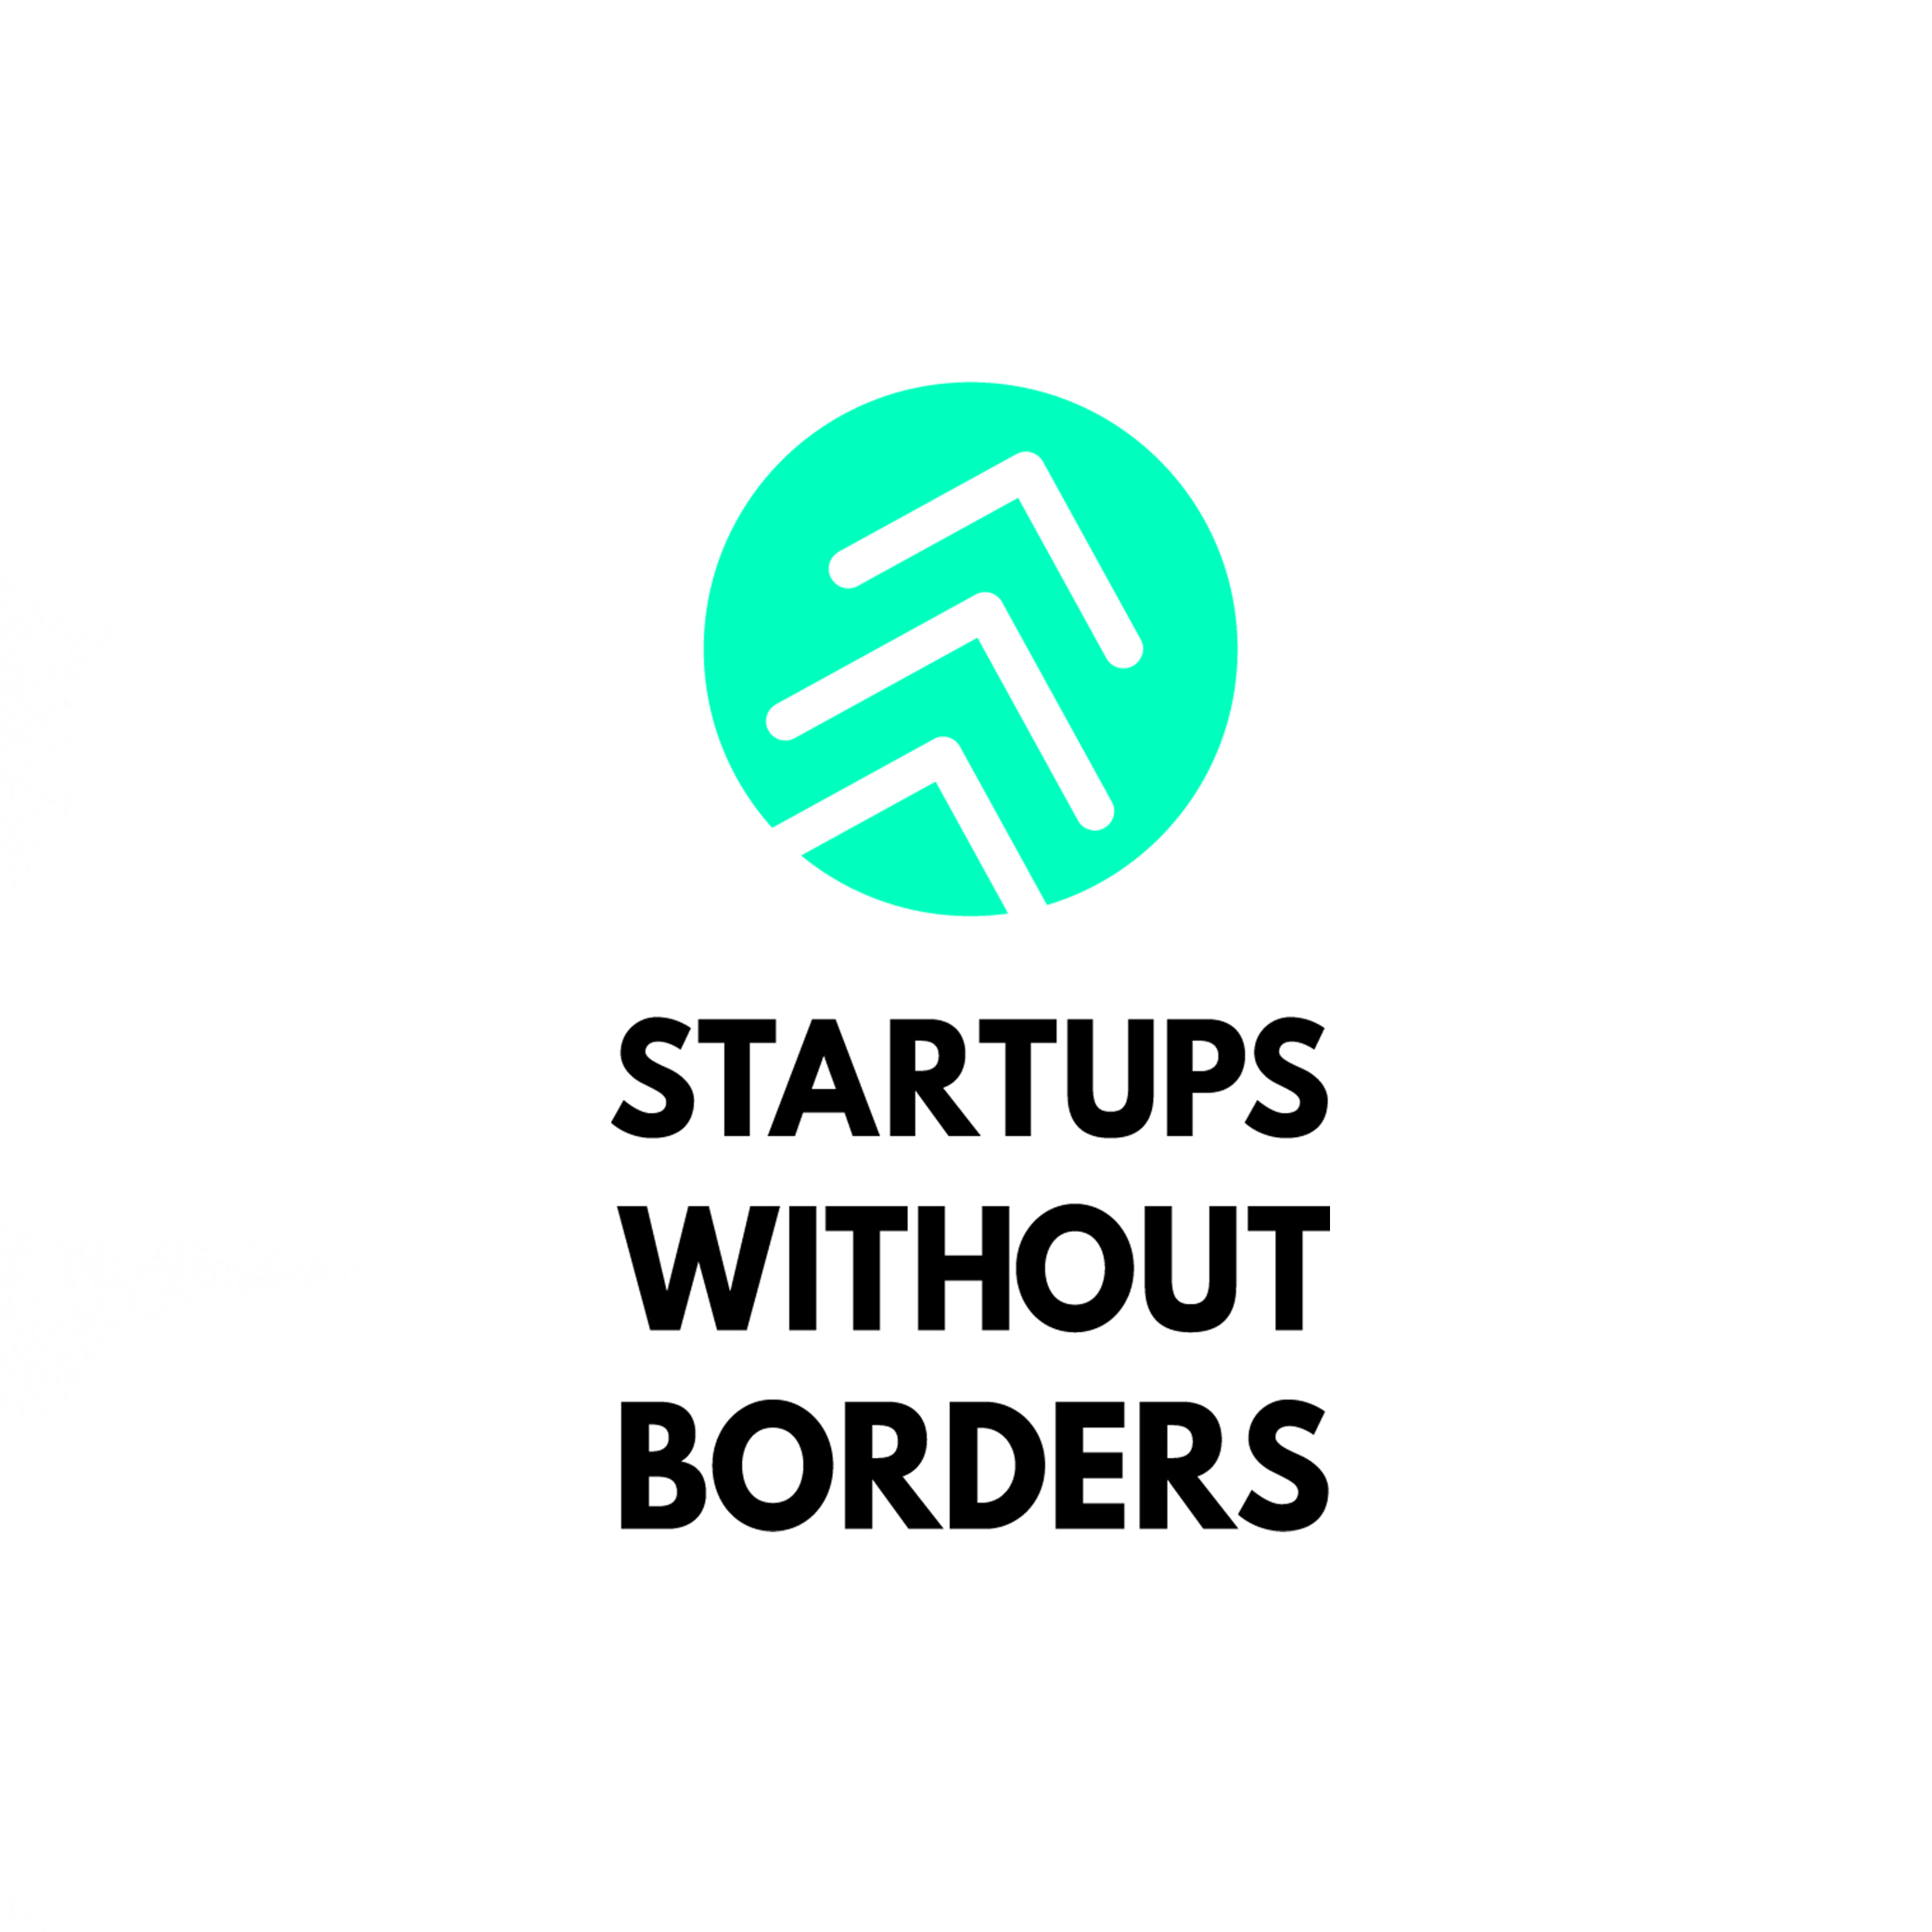 Startups Without Borders - CEI Partners